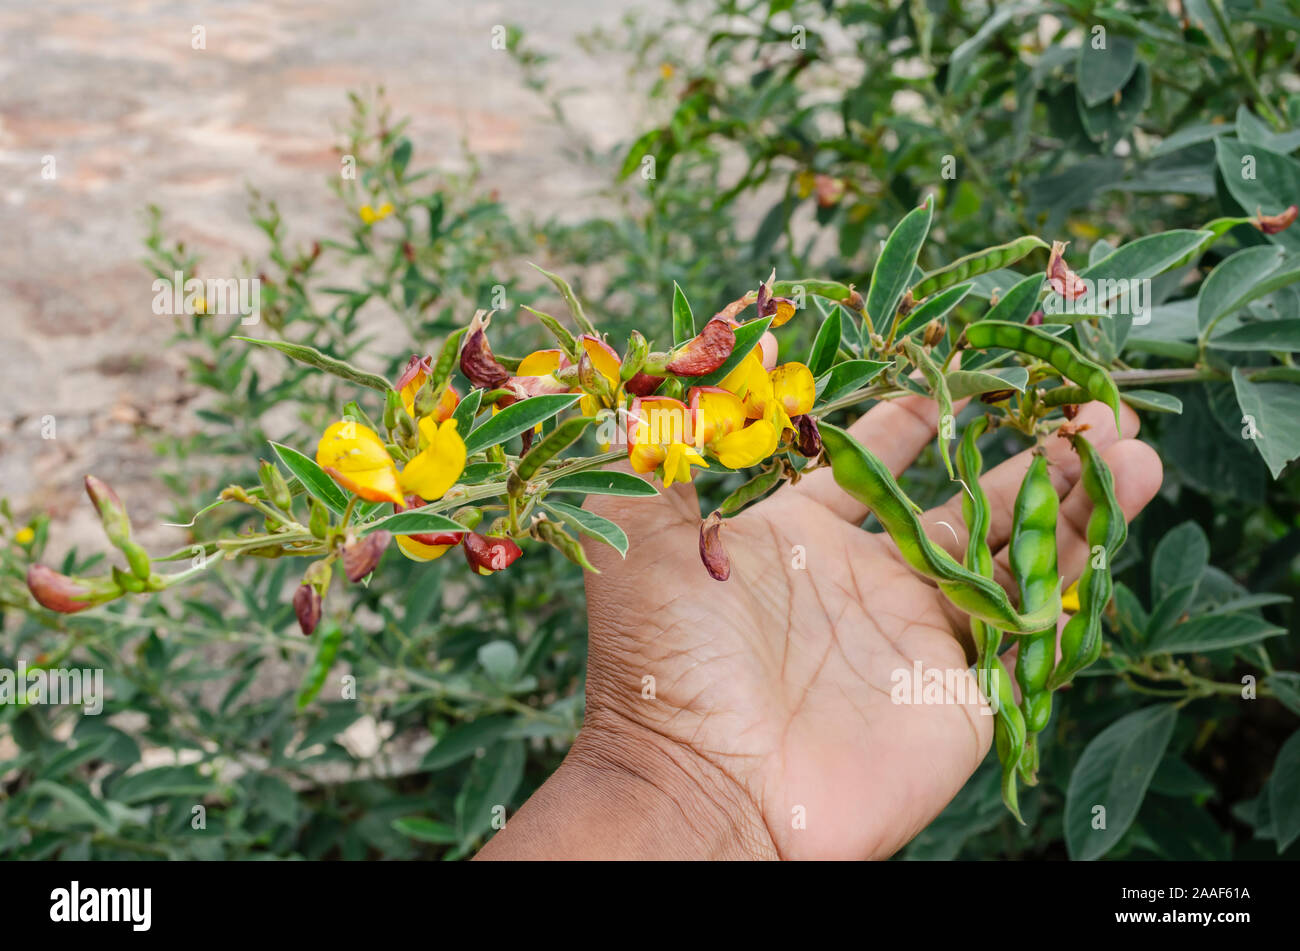 Pigeon Peas Blossoms And Pods in Hand Stock Photo